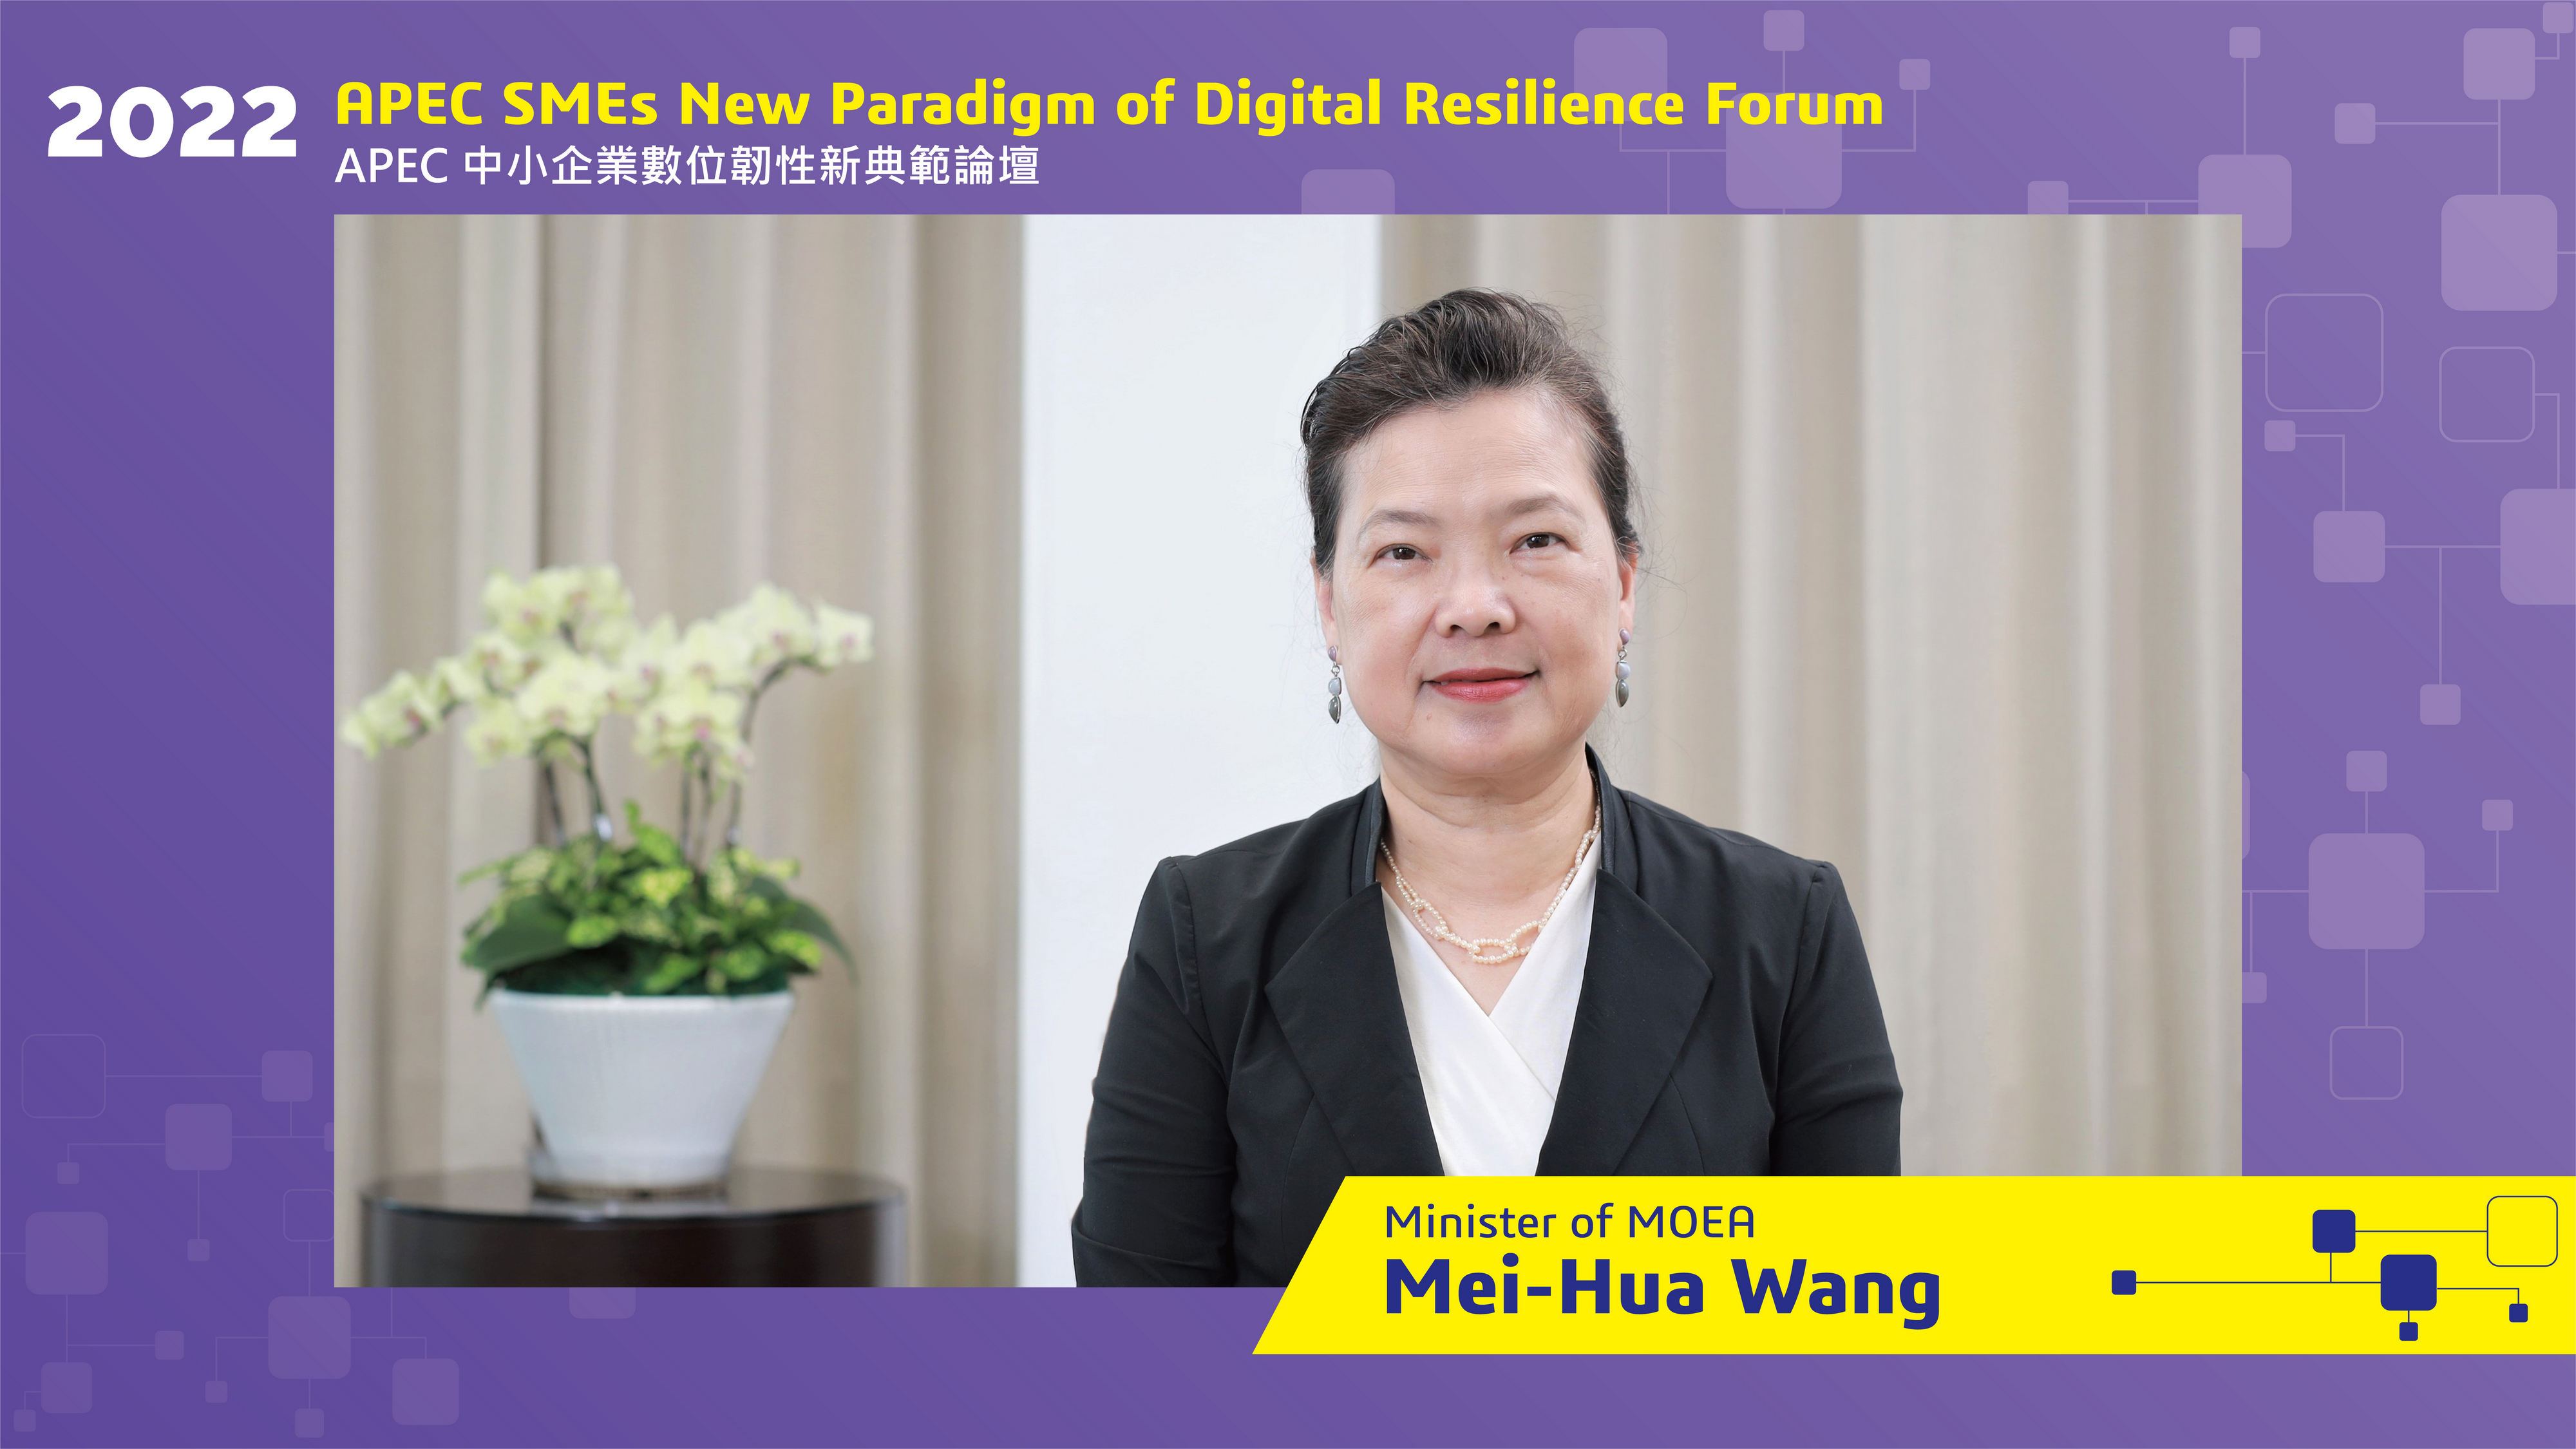 APEC SMEs New Paradigm of Digital Resilience